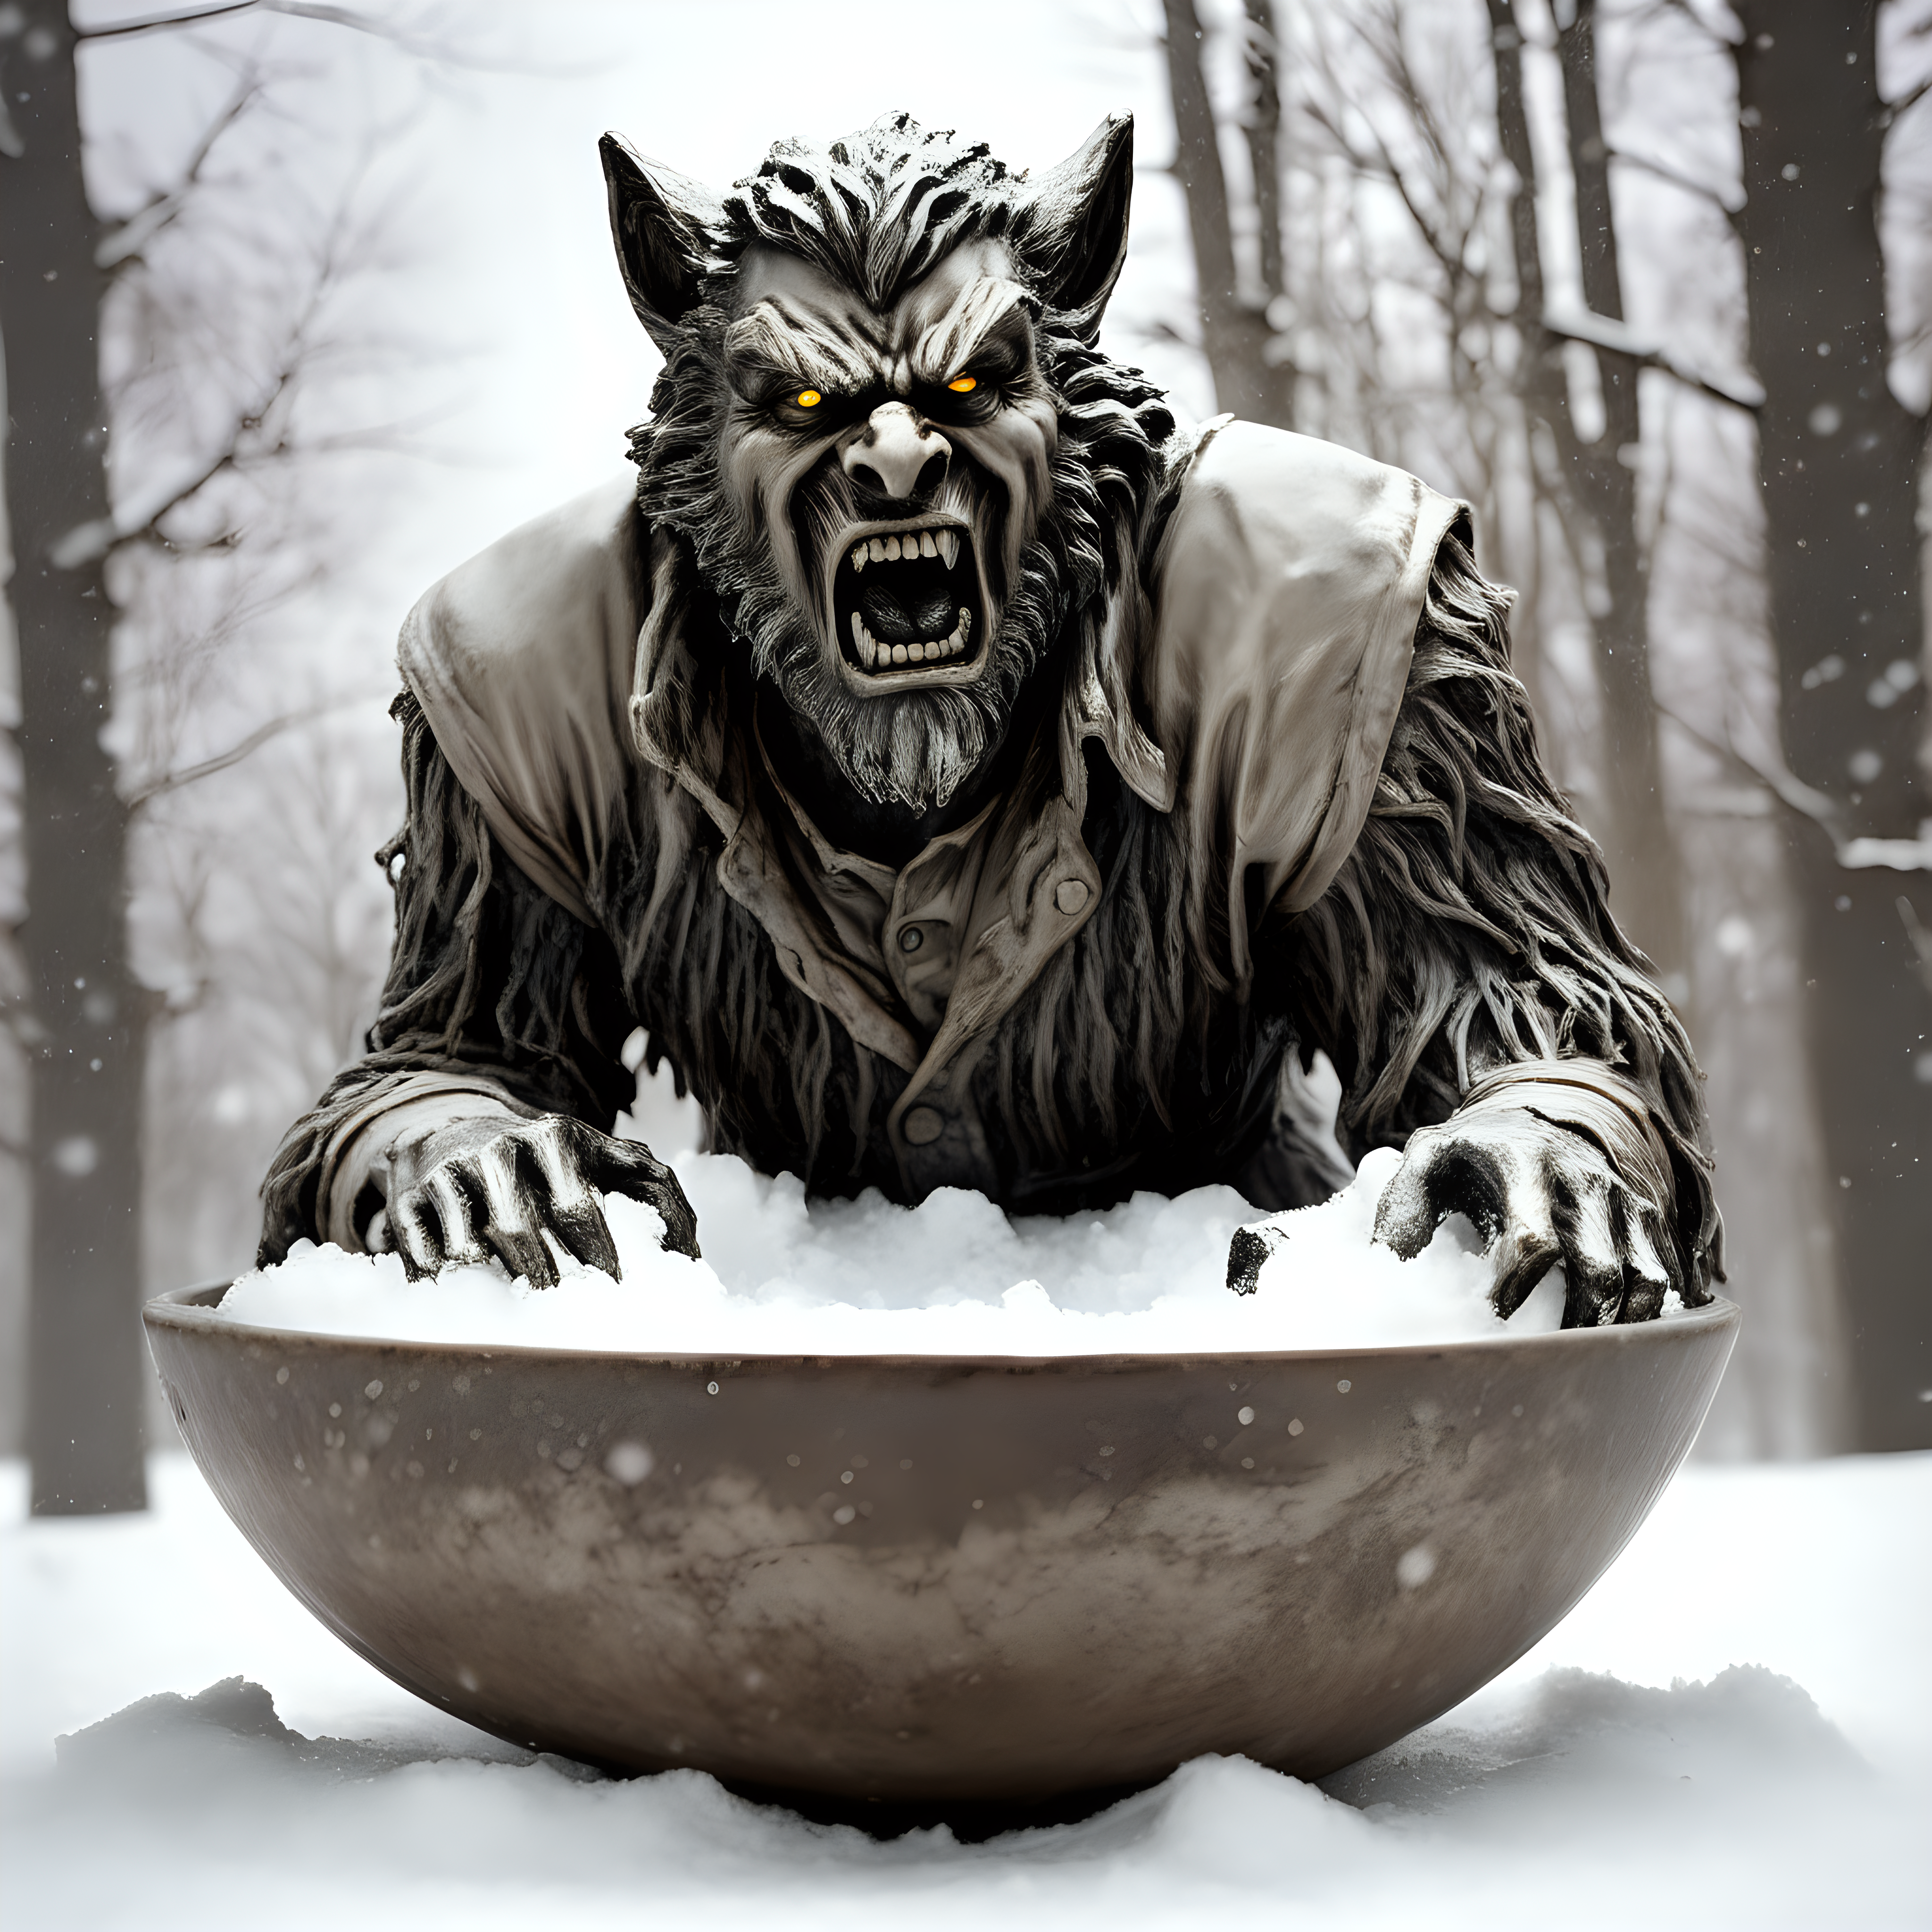 The Wolfman in a snow bowl